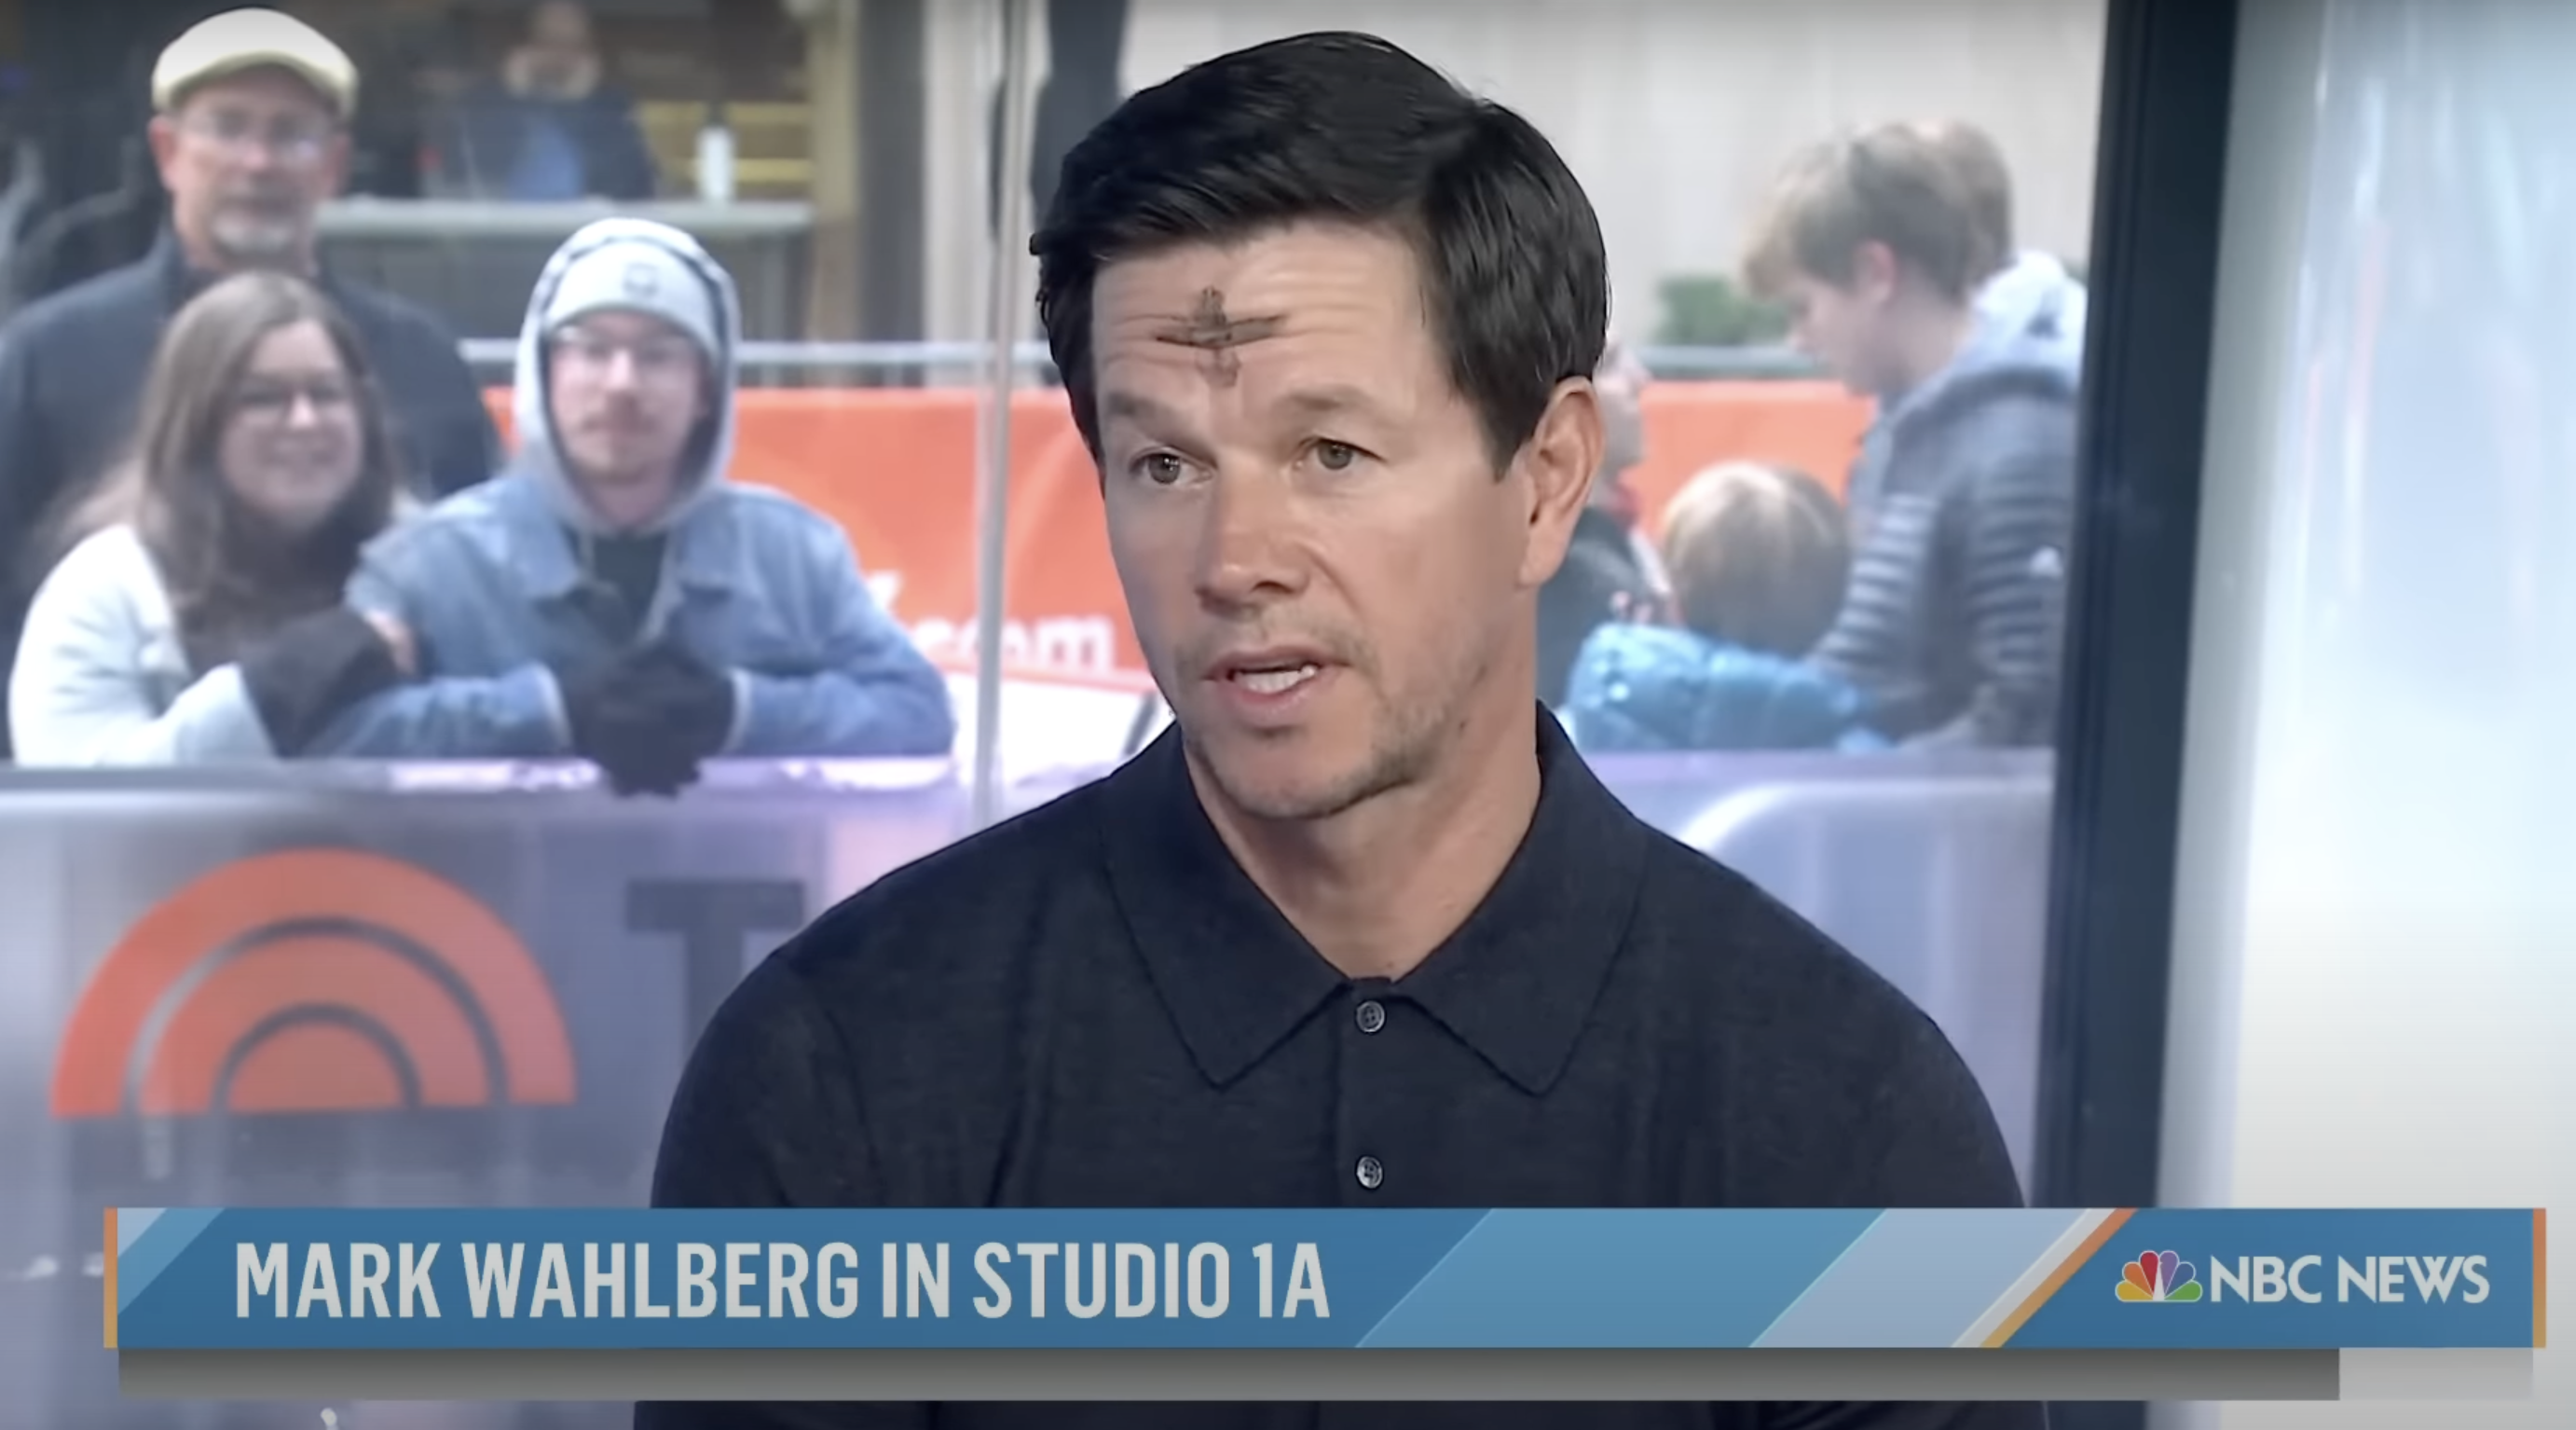 Mark Wahlberg talks about his faith during a TV show appearance | Source: YouTube.com/TODAY